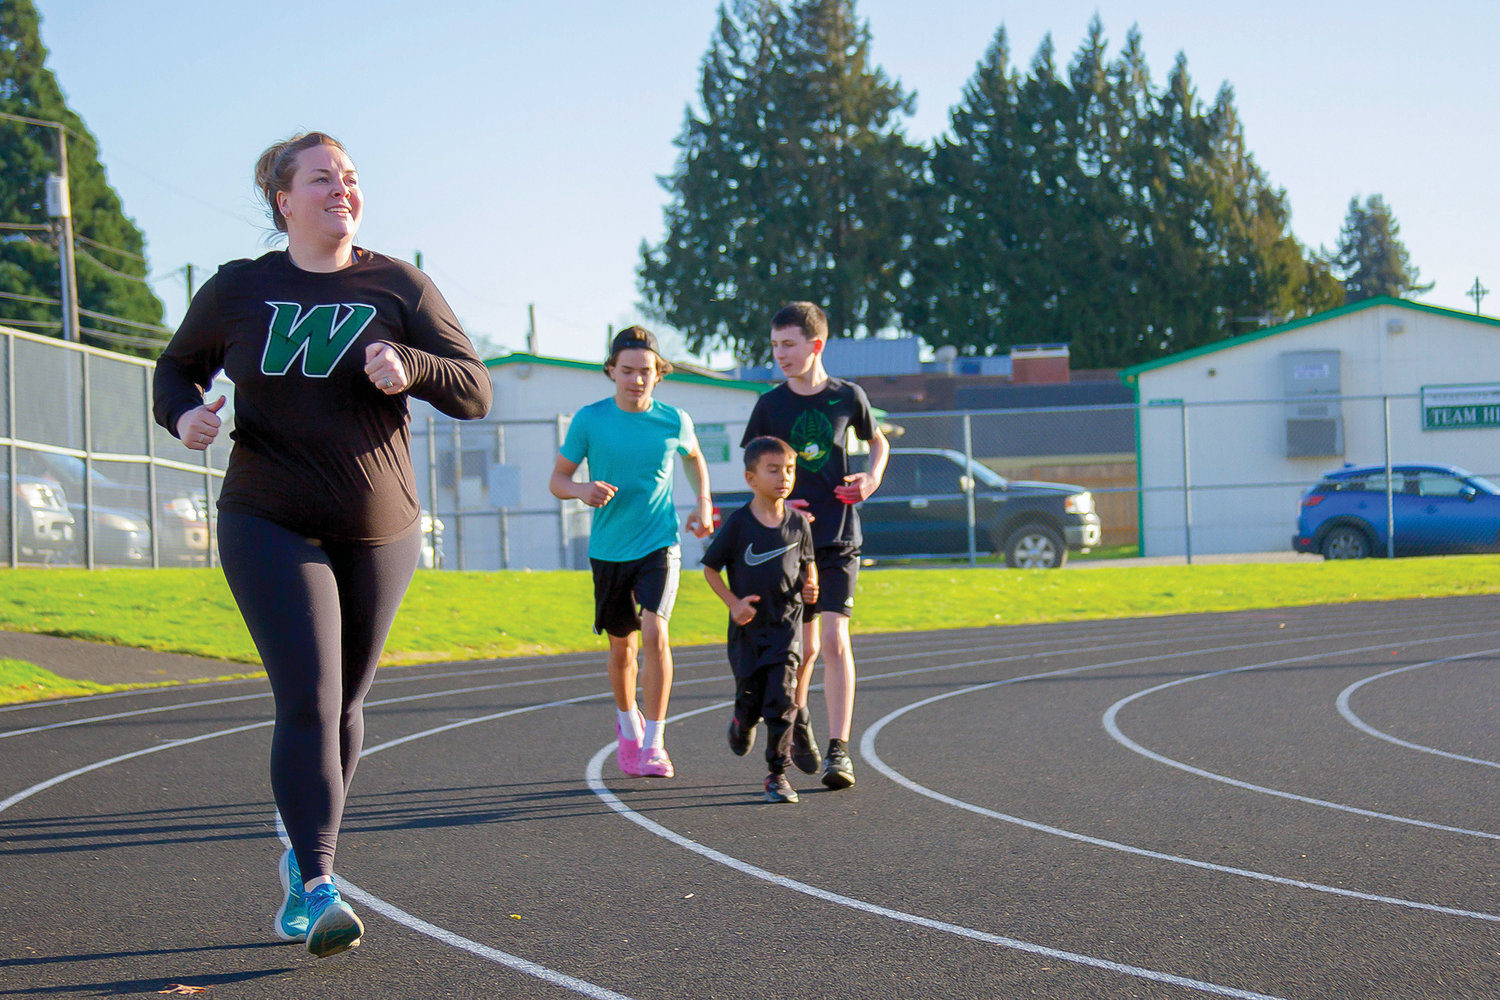 Woodland Middle School’s running club will host a 5K race on Saturday, March 25.